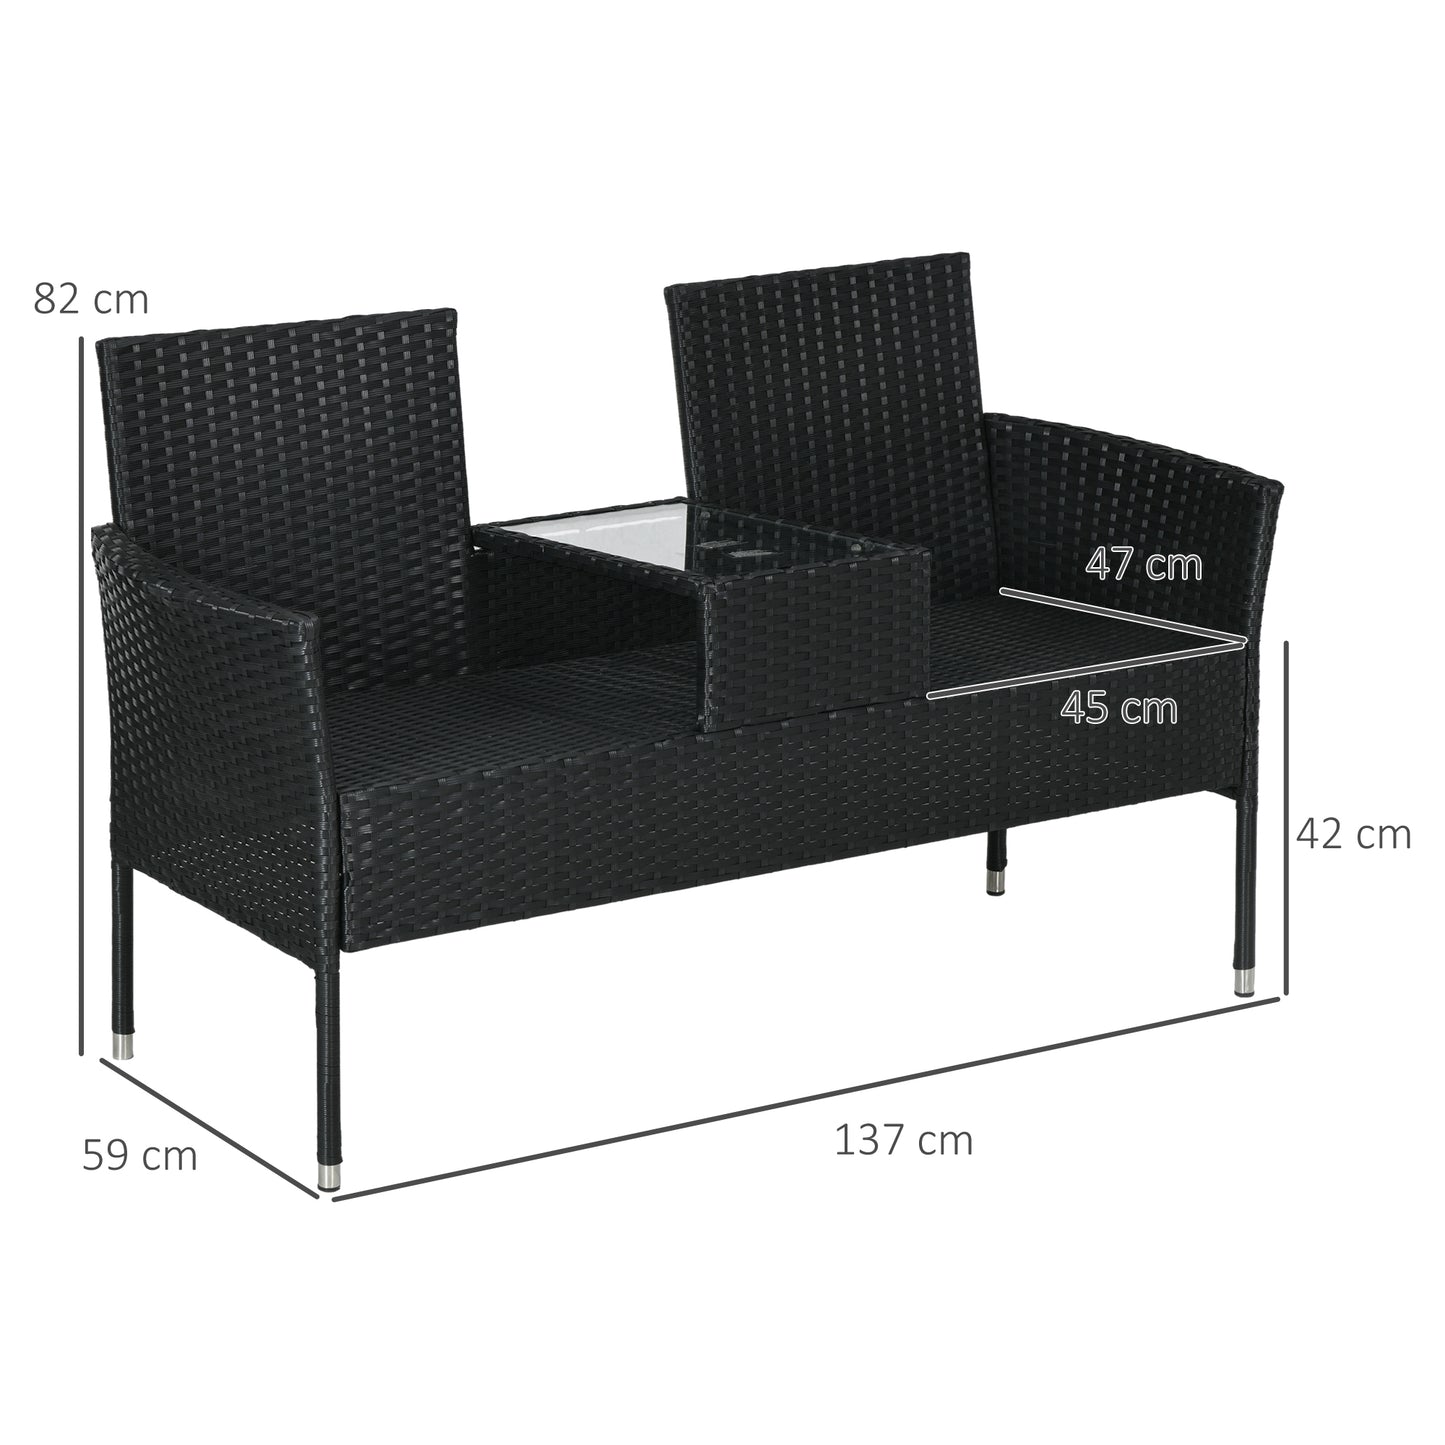 2-Seater Outdoor Sofa with Coffee Table, in Steel and PE Rattan, 137x59x82 cm, Black